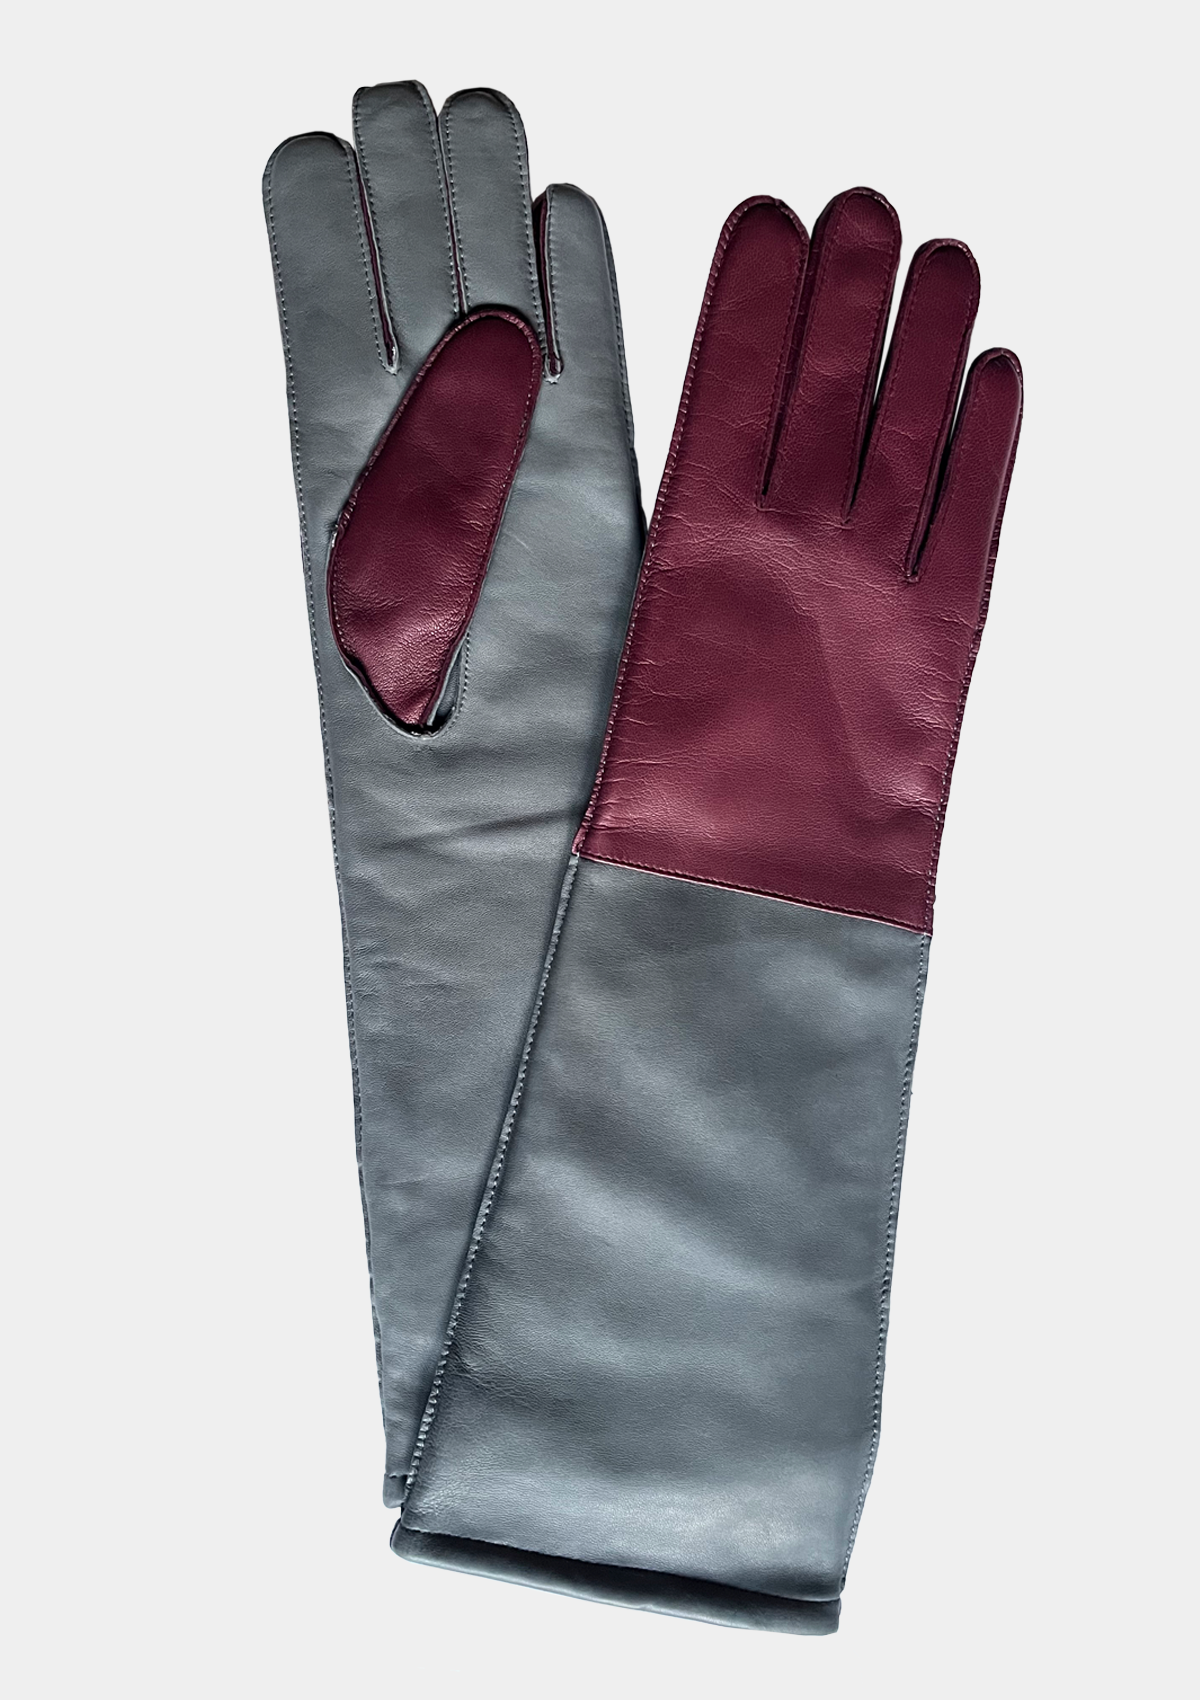 GRAY AND BURGUNDY COLORBLOCK GLOVES